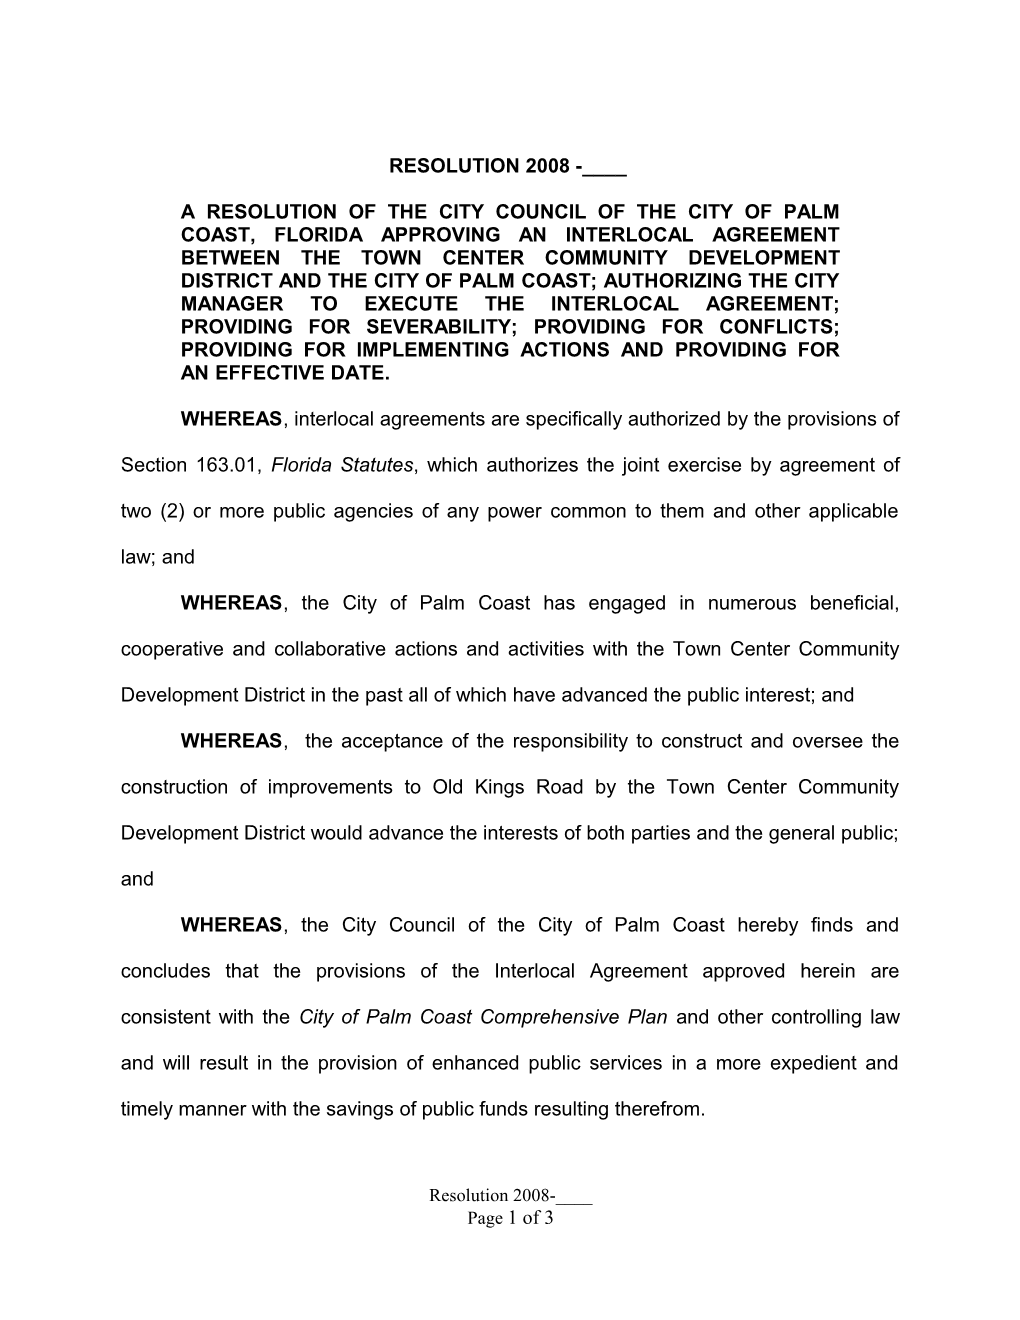 A Resolution of the City Council of the City of Palm Coast, Florida Approving an Interlocal